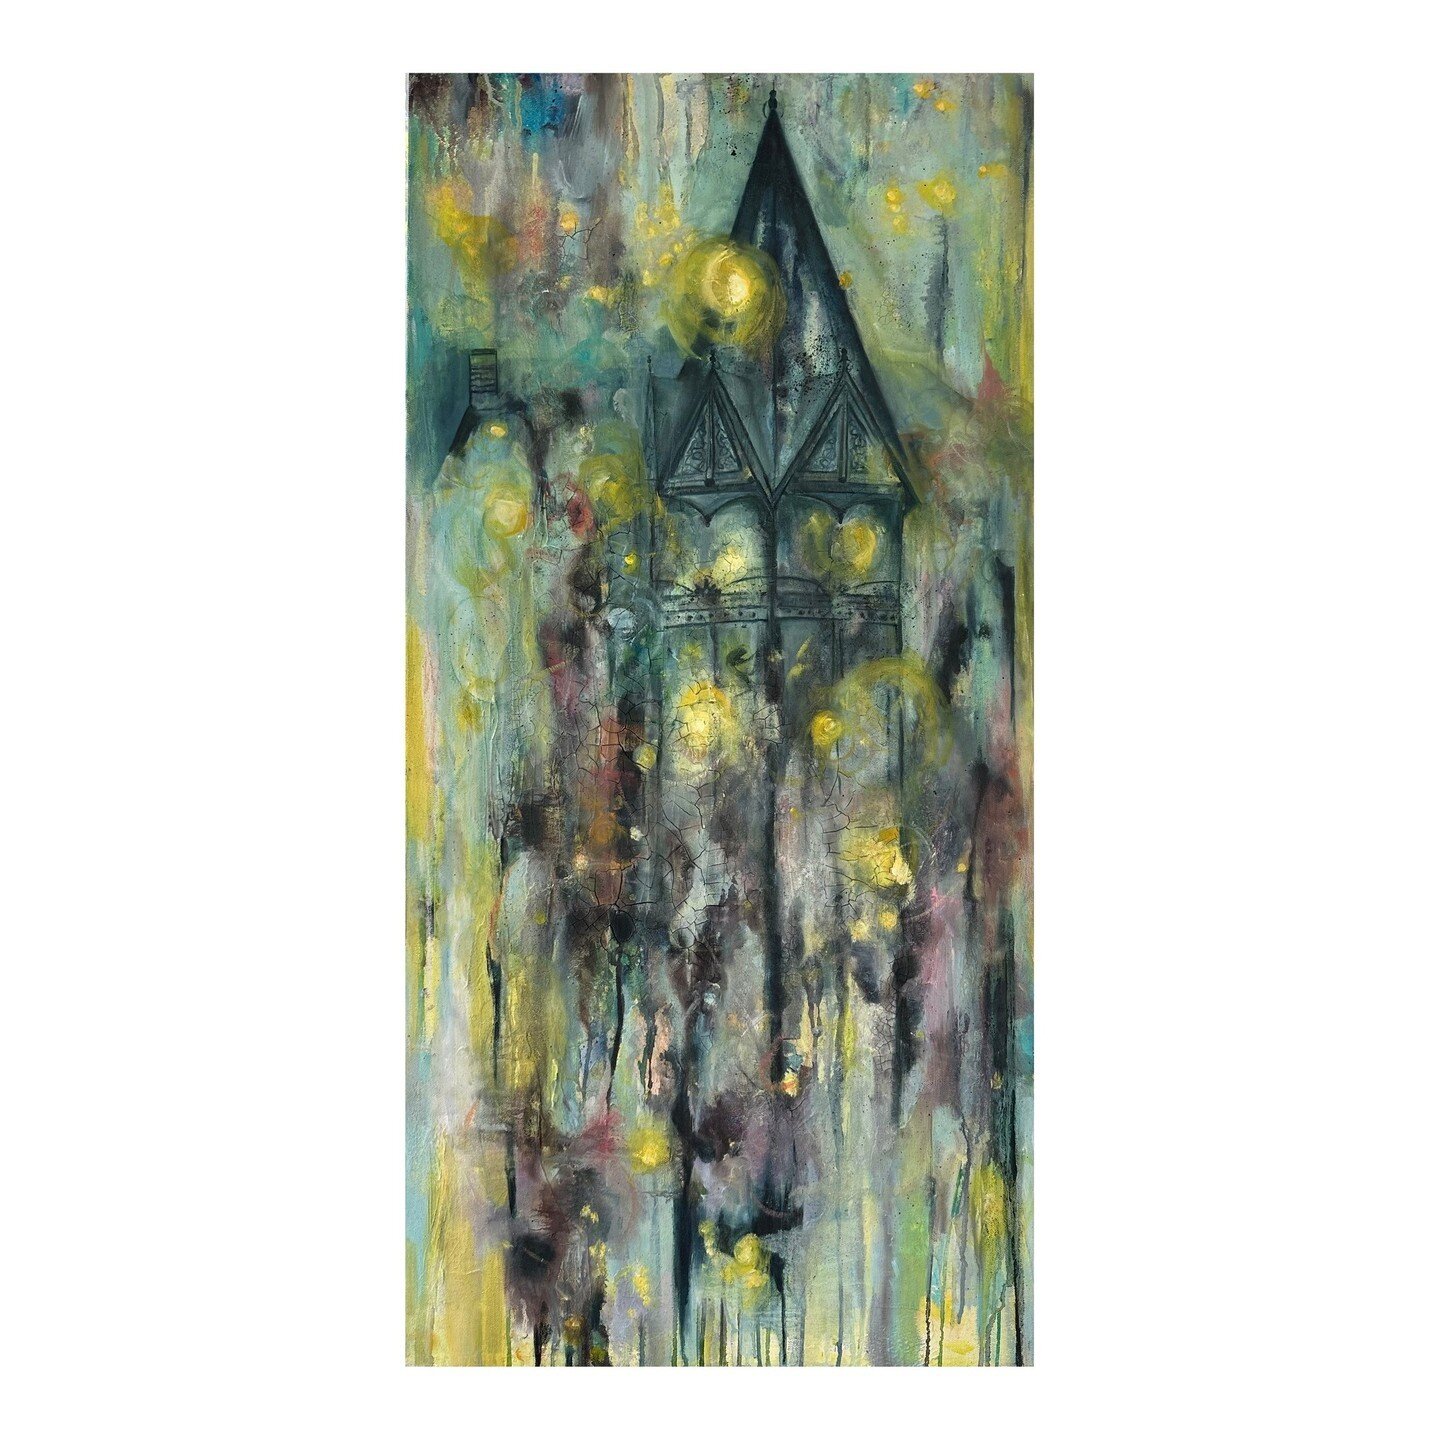 Tara Conway: &quot;Dark Ginger&quot;⁠
Oil and acrylic⁠
18 x 36&quot;⁠
2023⁠
⁠
&ldquo;Dark Ginger is my newest piece and in line with my other works that all incorporate architecture with memories and nostalgia. I find that it speaks for itself and em